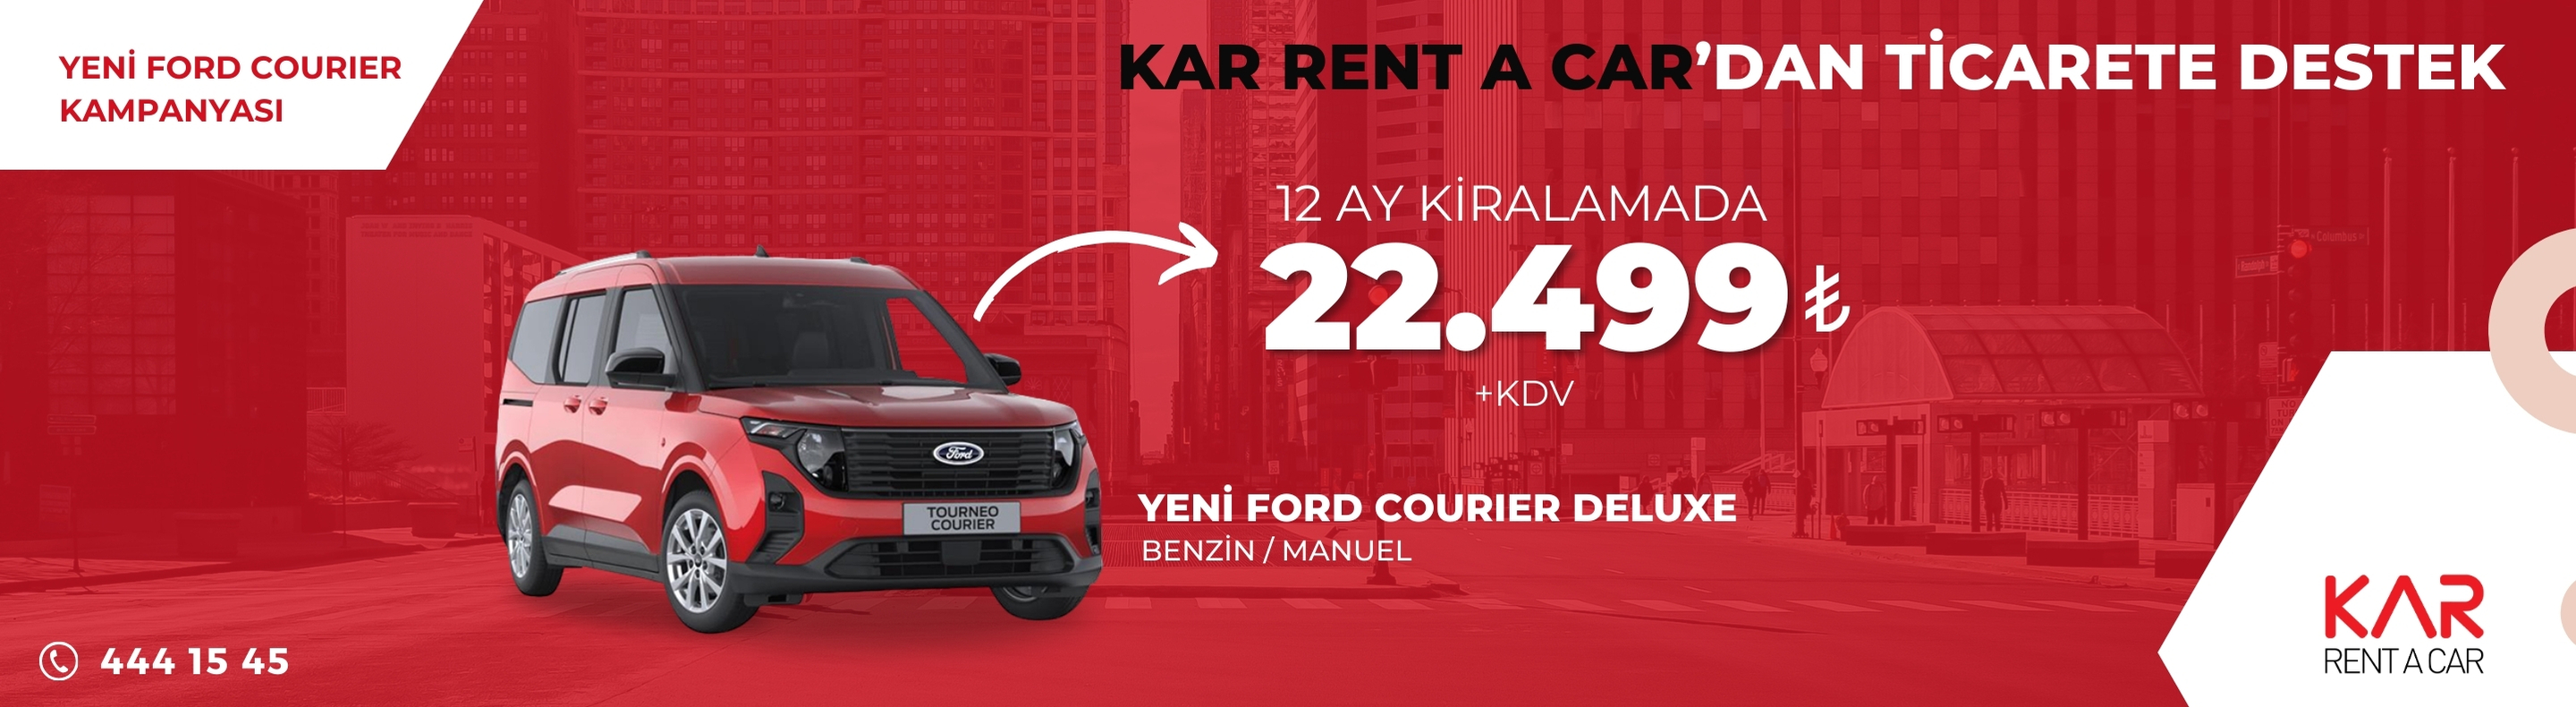 New Ford Courier Campaigns